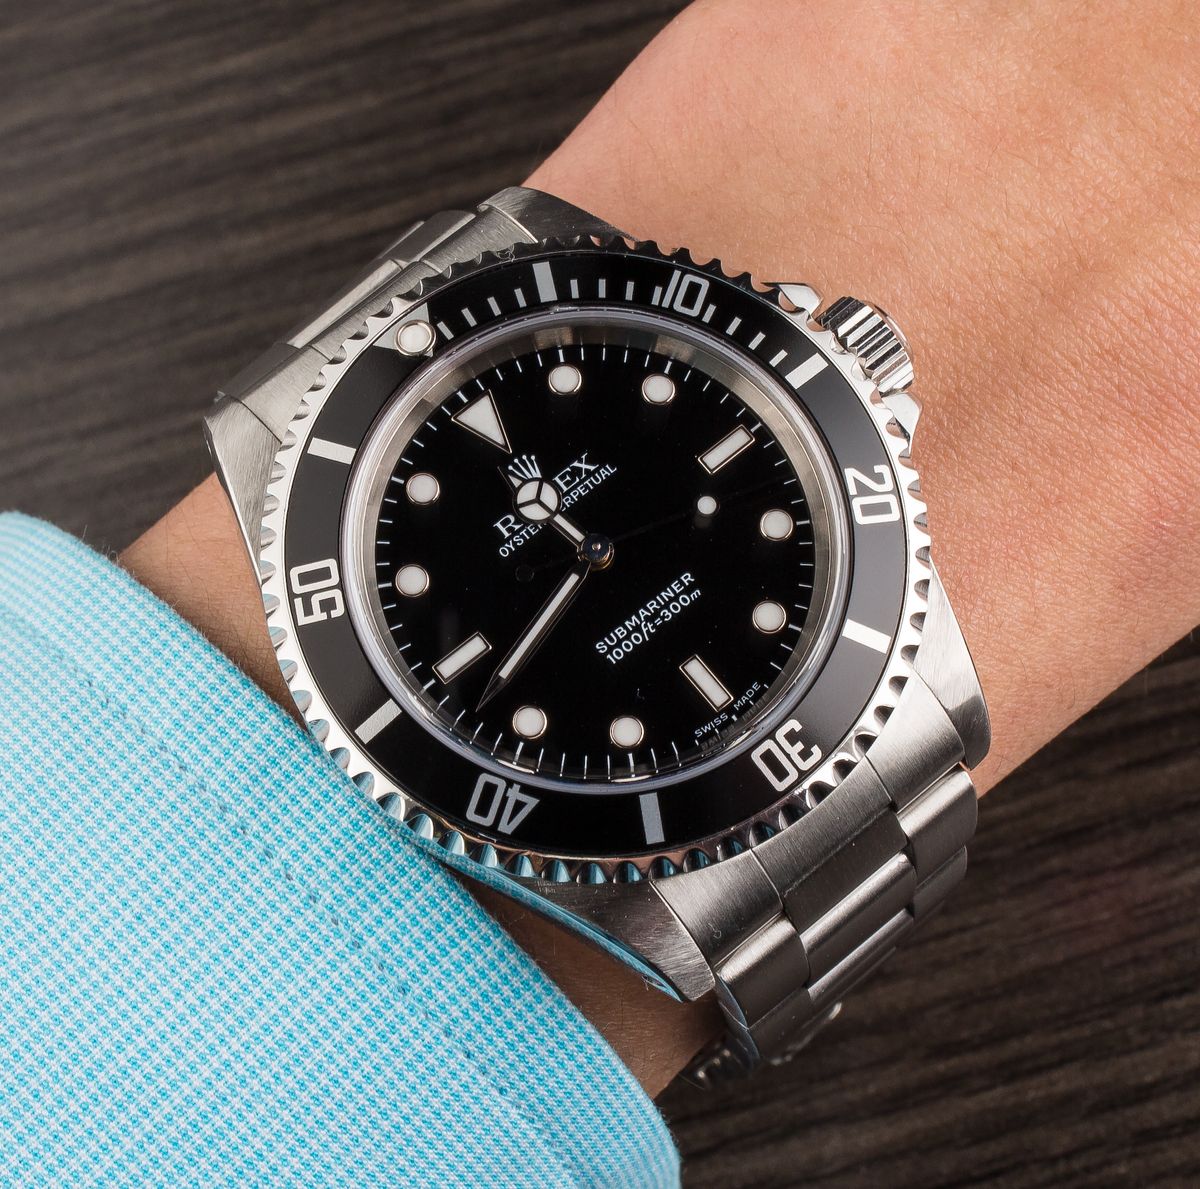 Rolex Submariner: Date or No Date ? - That everlasting question